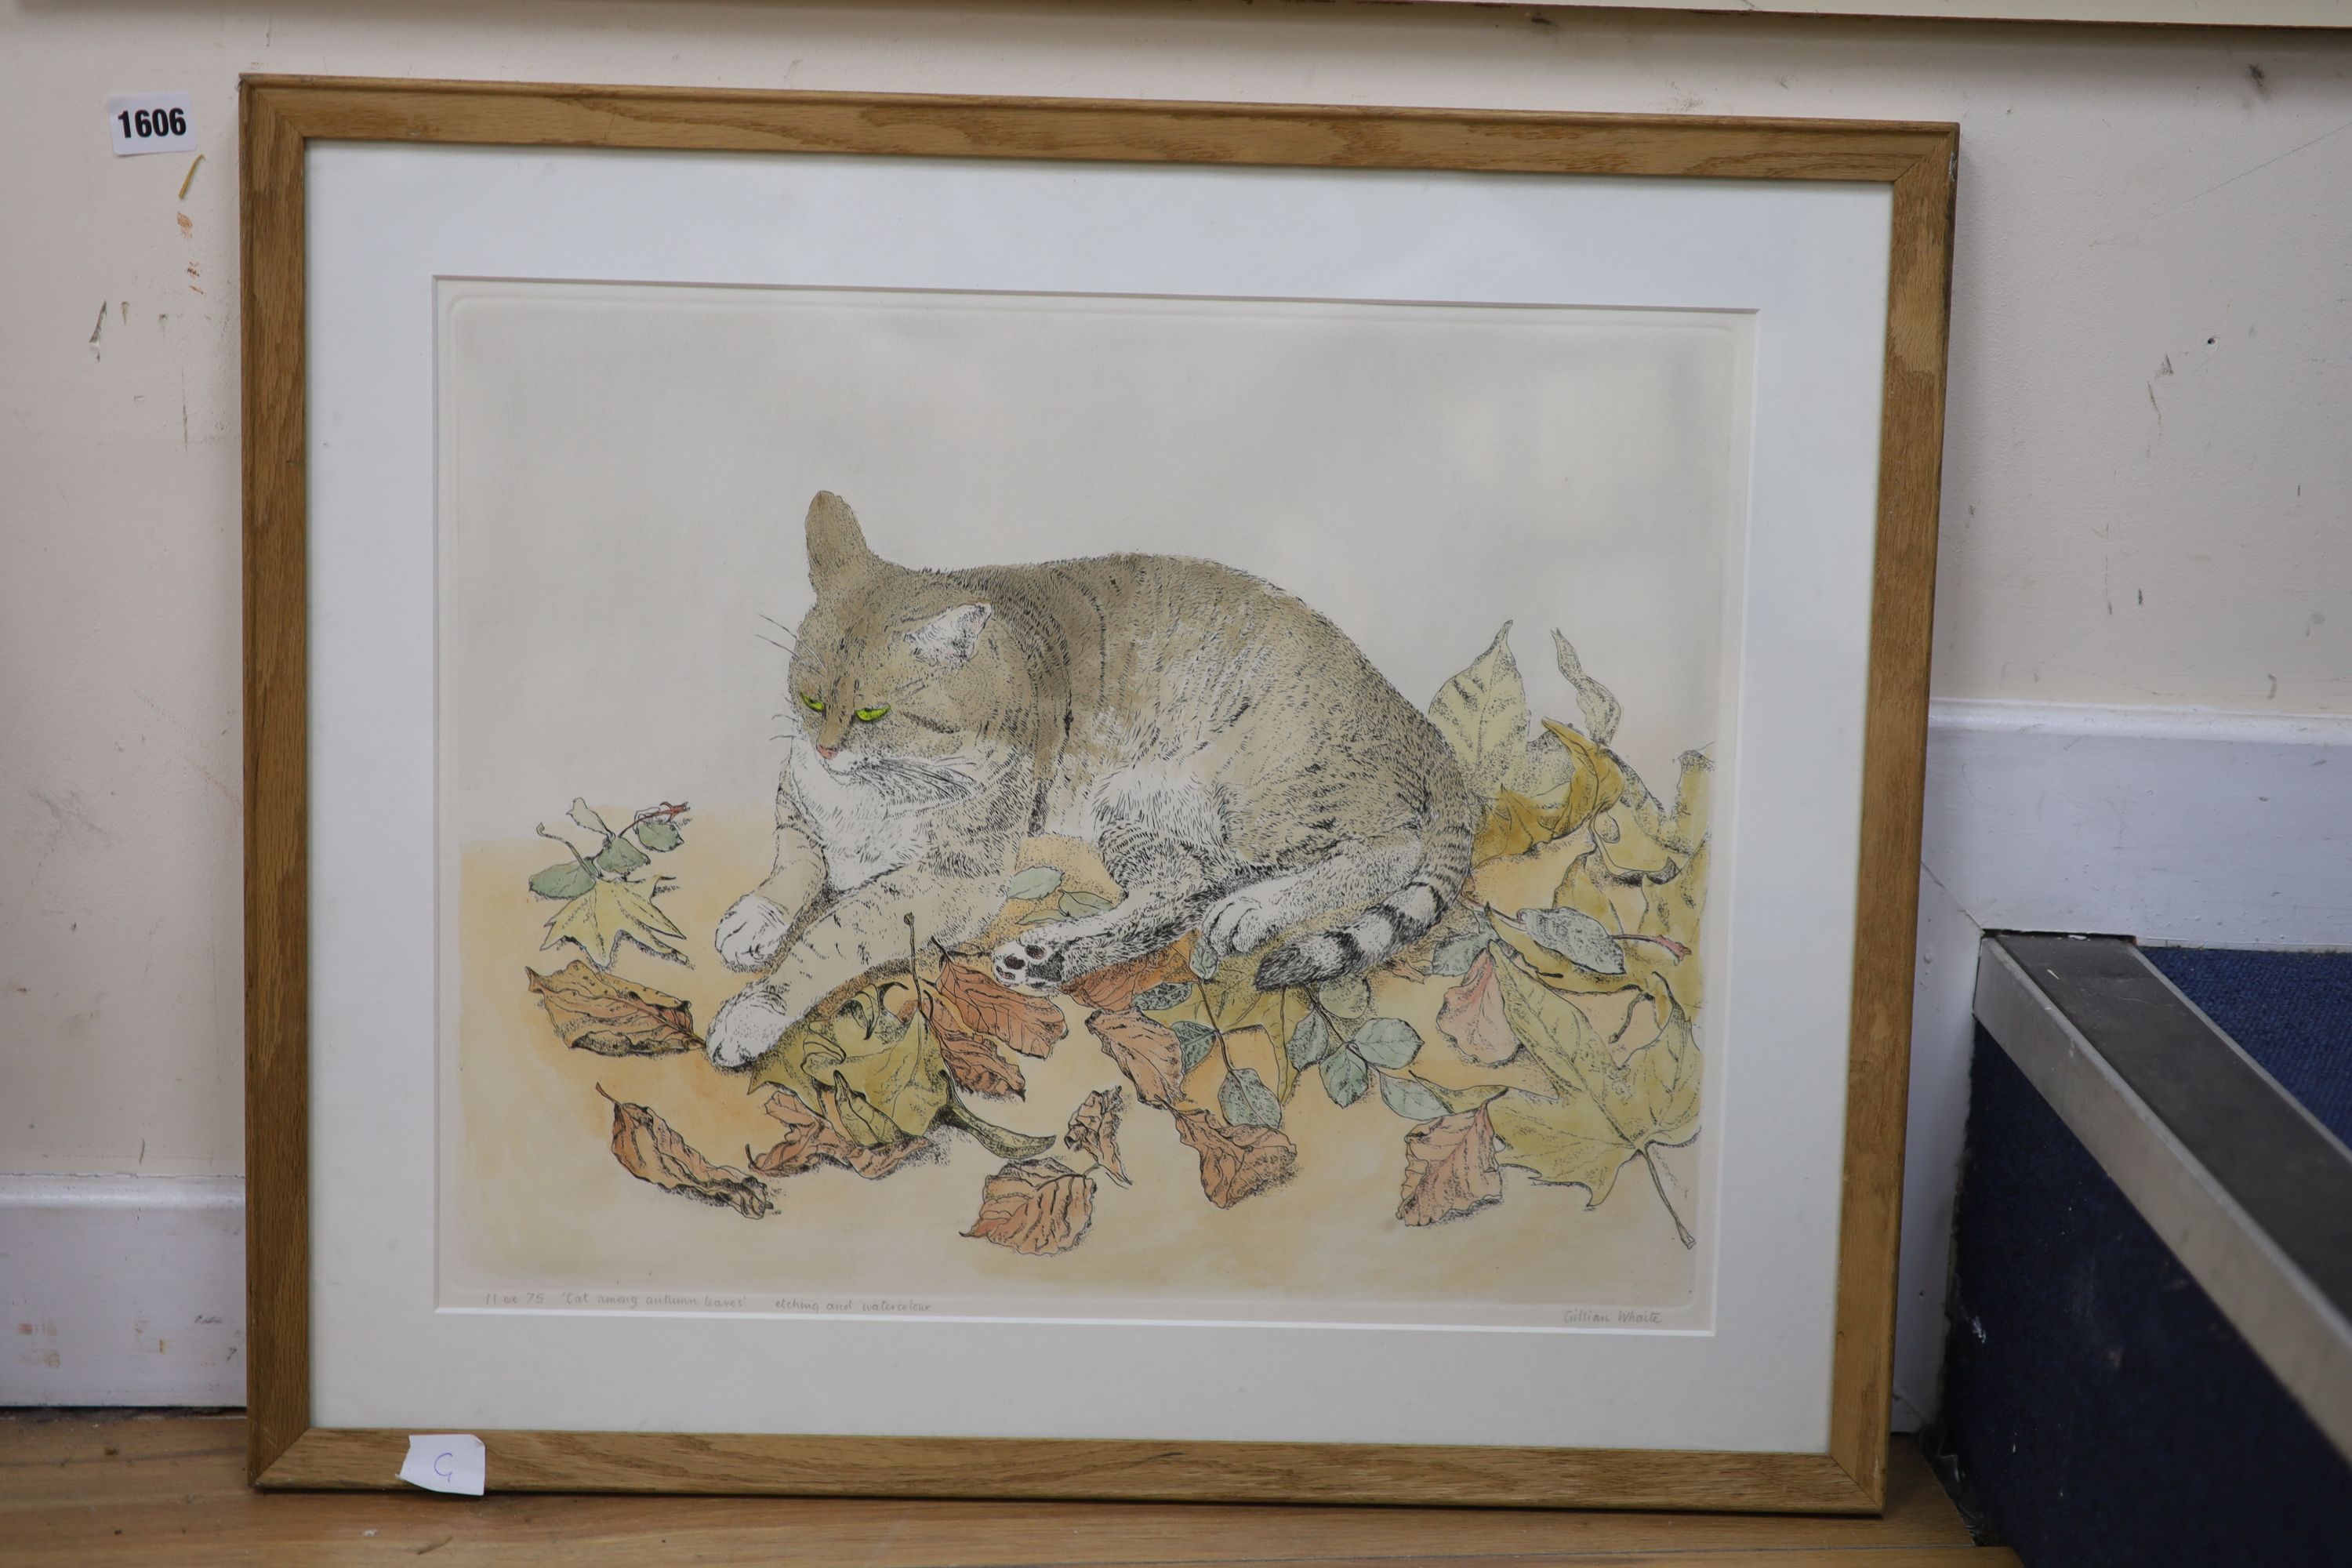 Gillian Whaite (1934-), etching and watercolour, Cat among autumn leaves, signed, 11/75, 40 x 50cm